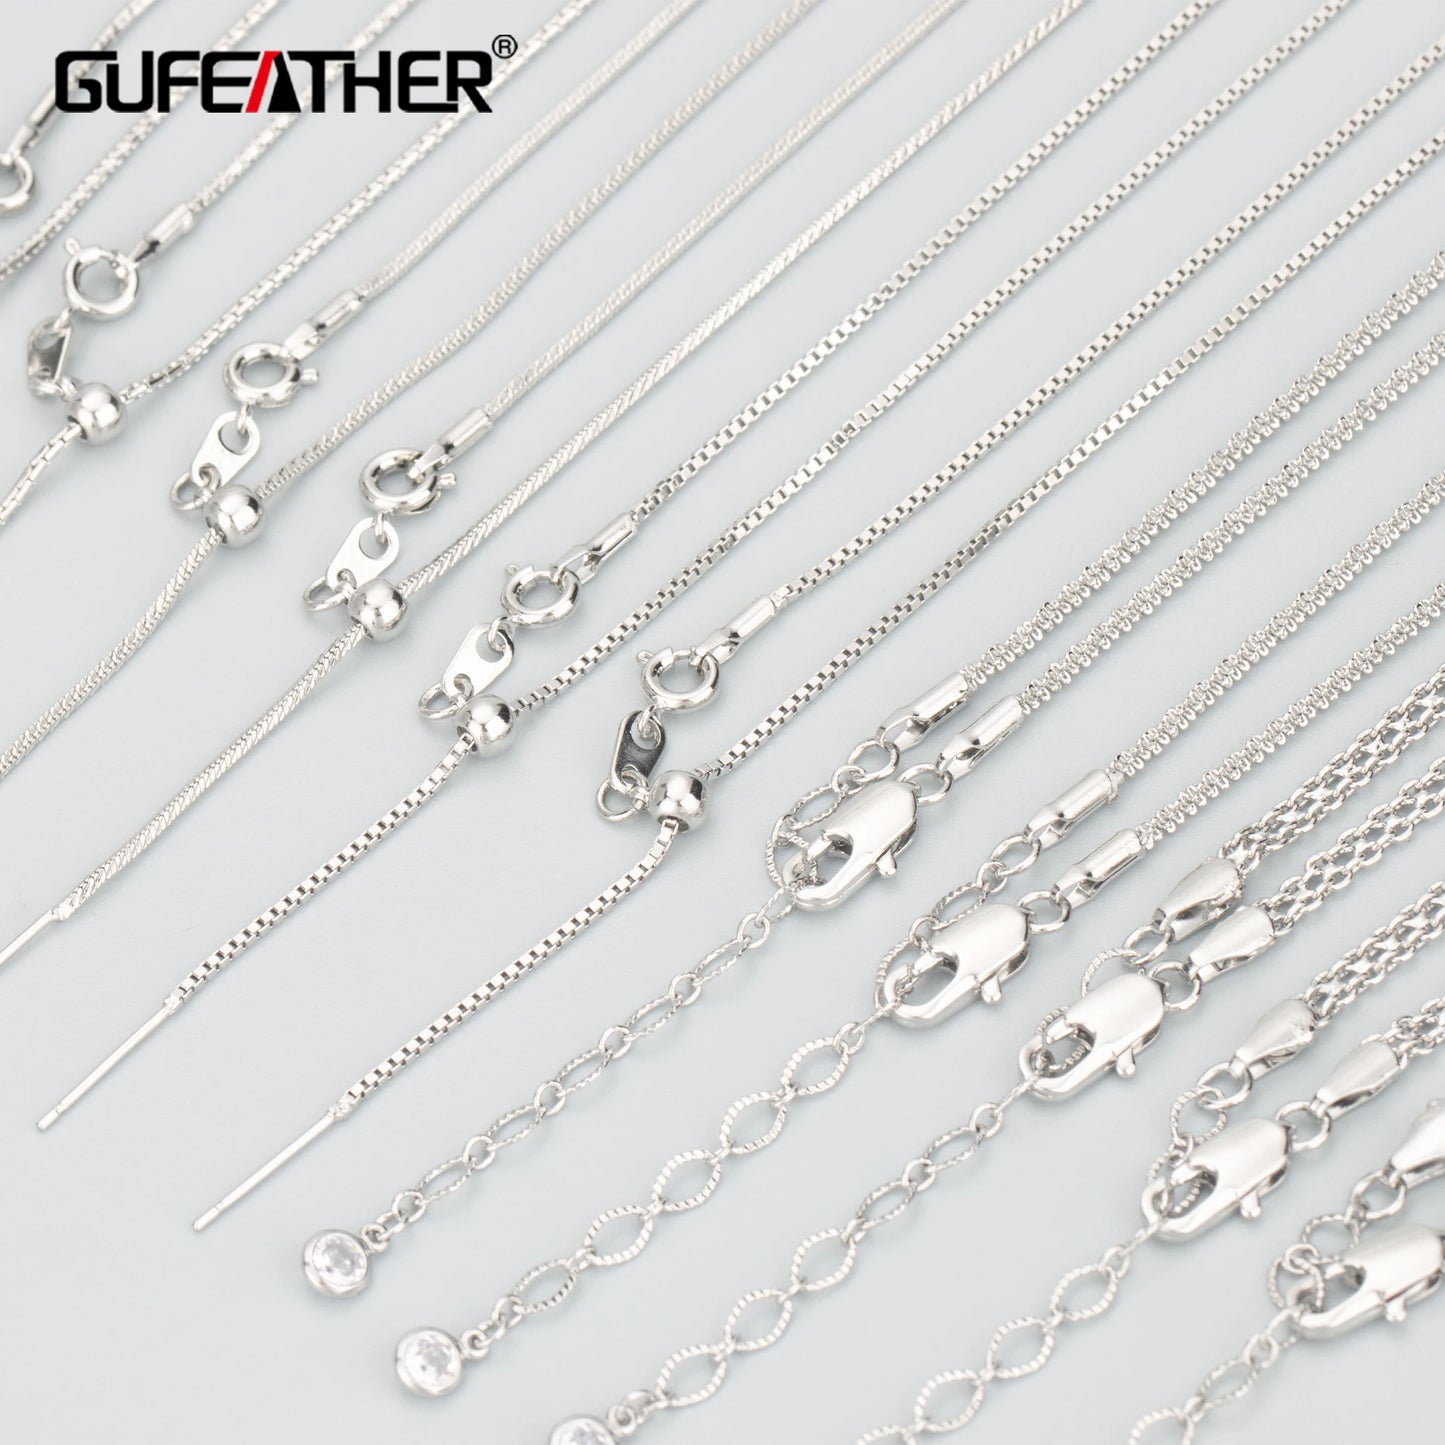 GUFEATHER MB68,fashion thin necklace,nickel free,18k gold rhodium plated,long necklace diy chain,mash up necklace,one pcs/lot